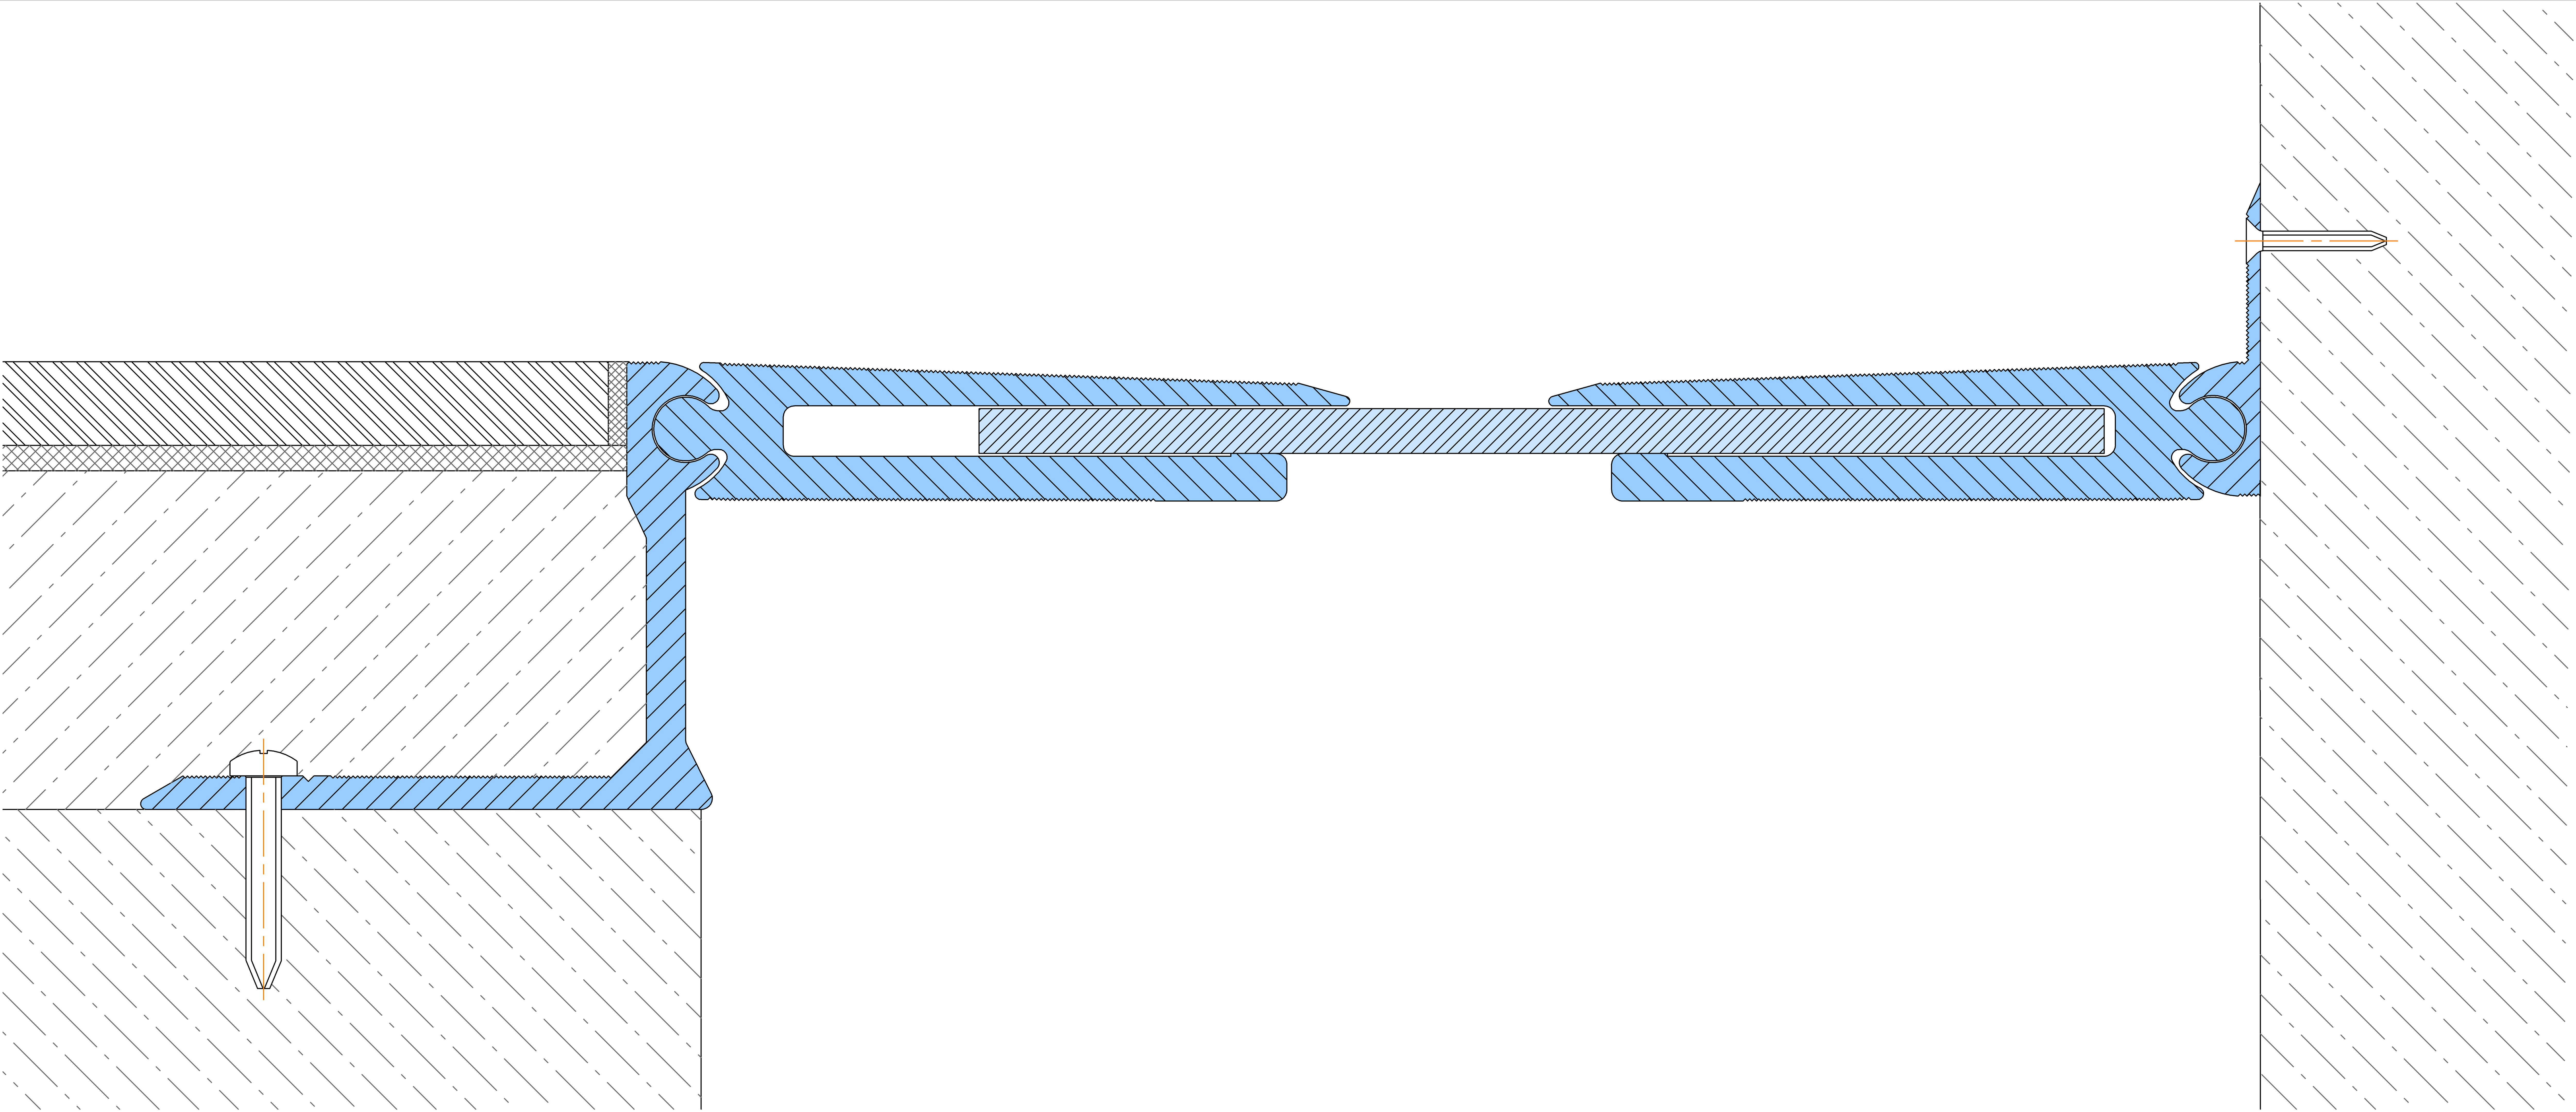 cross-sectional profile, drawing SV 47